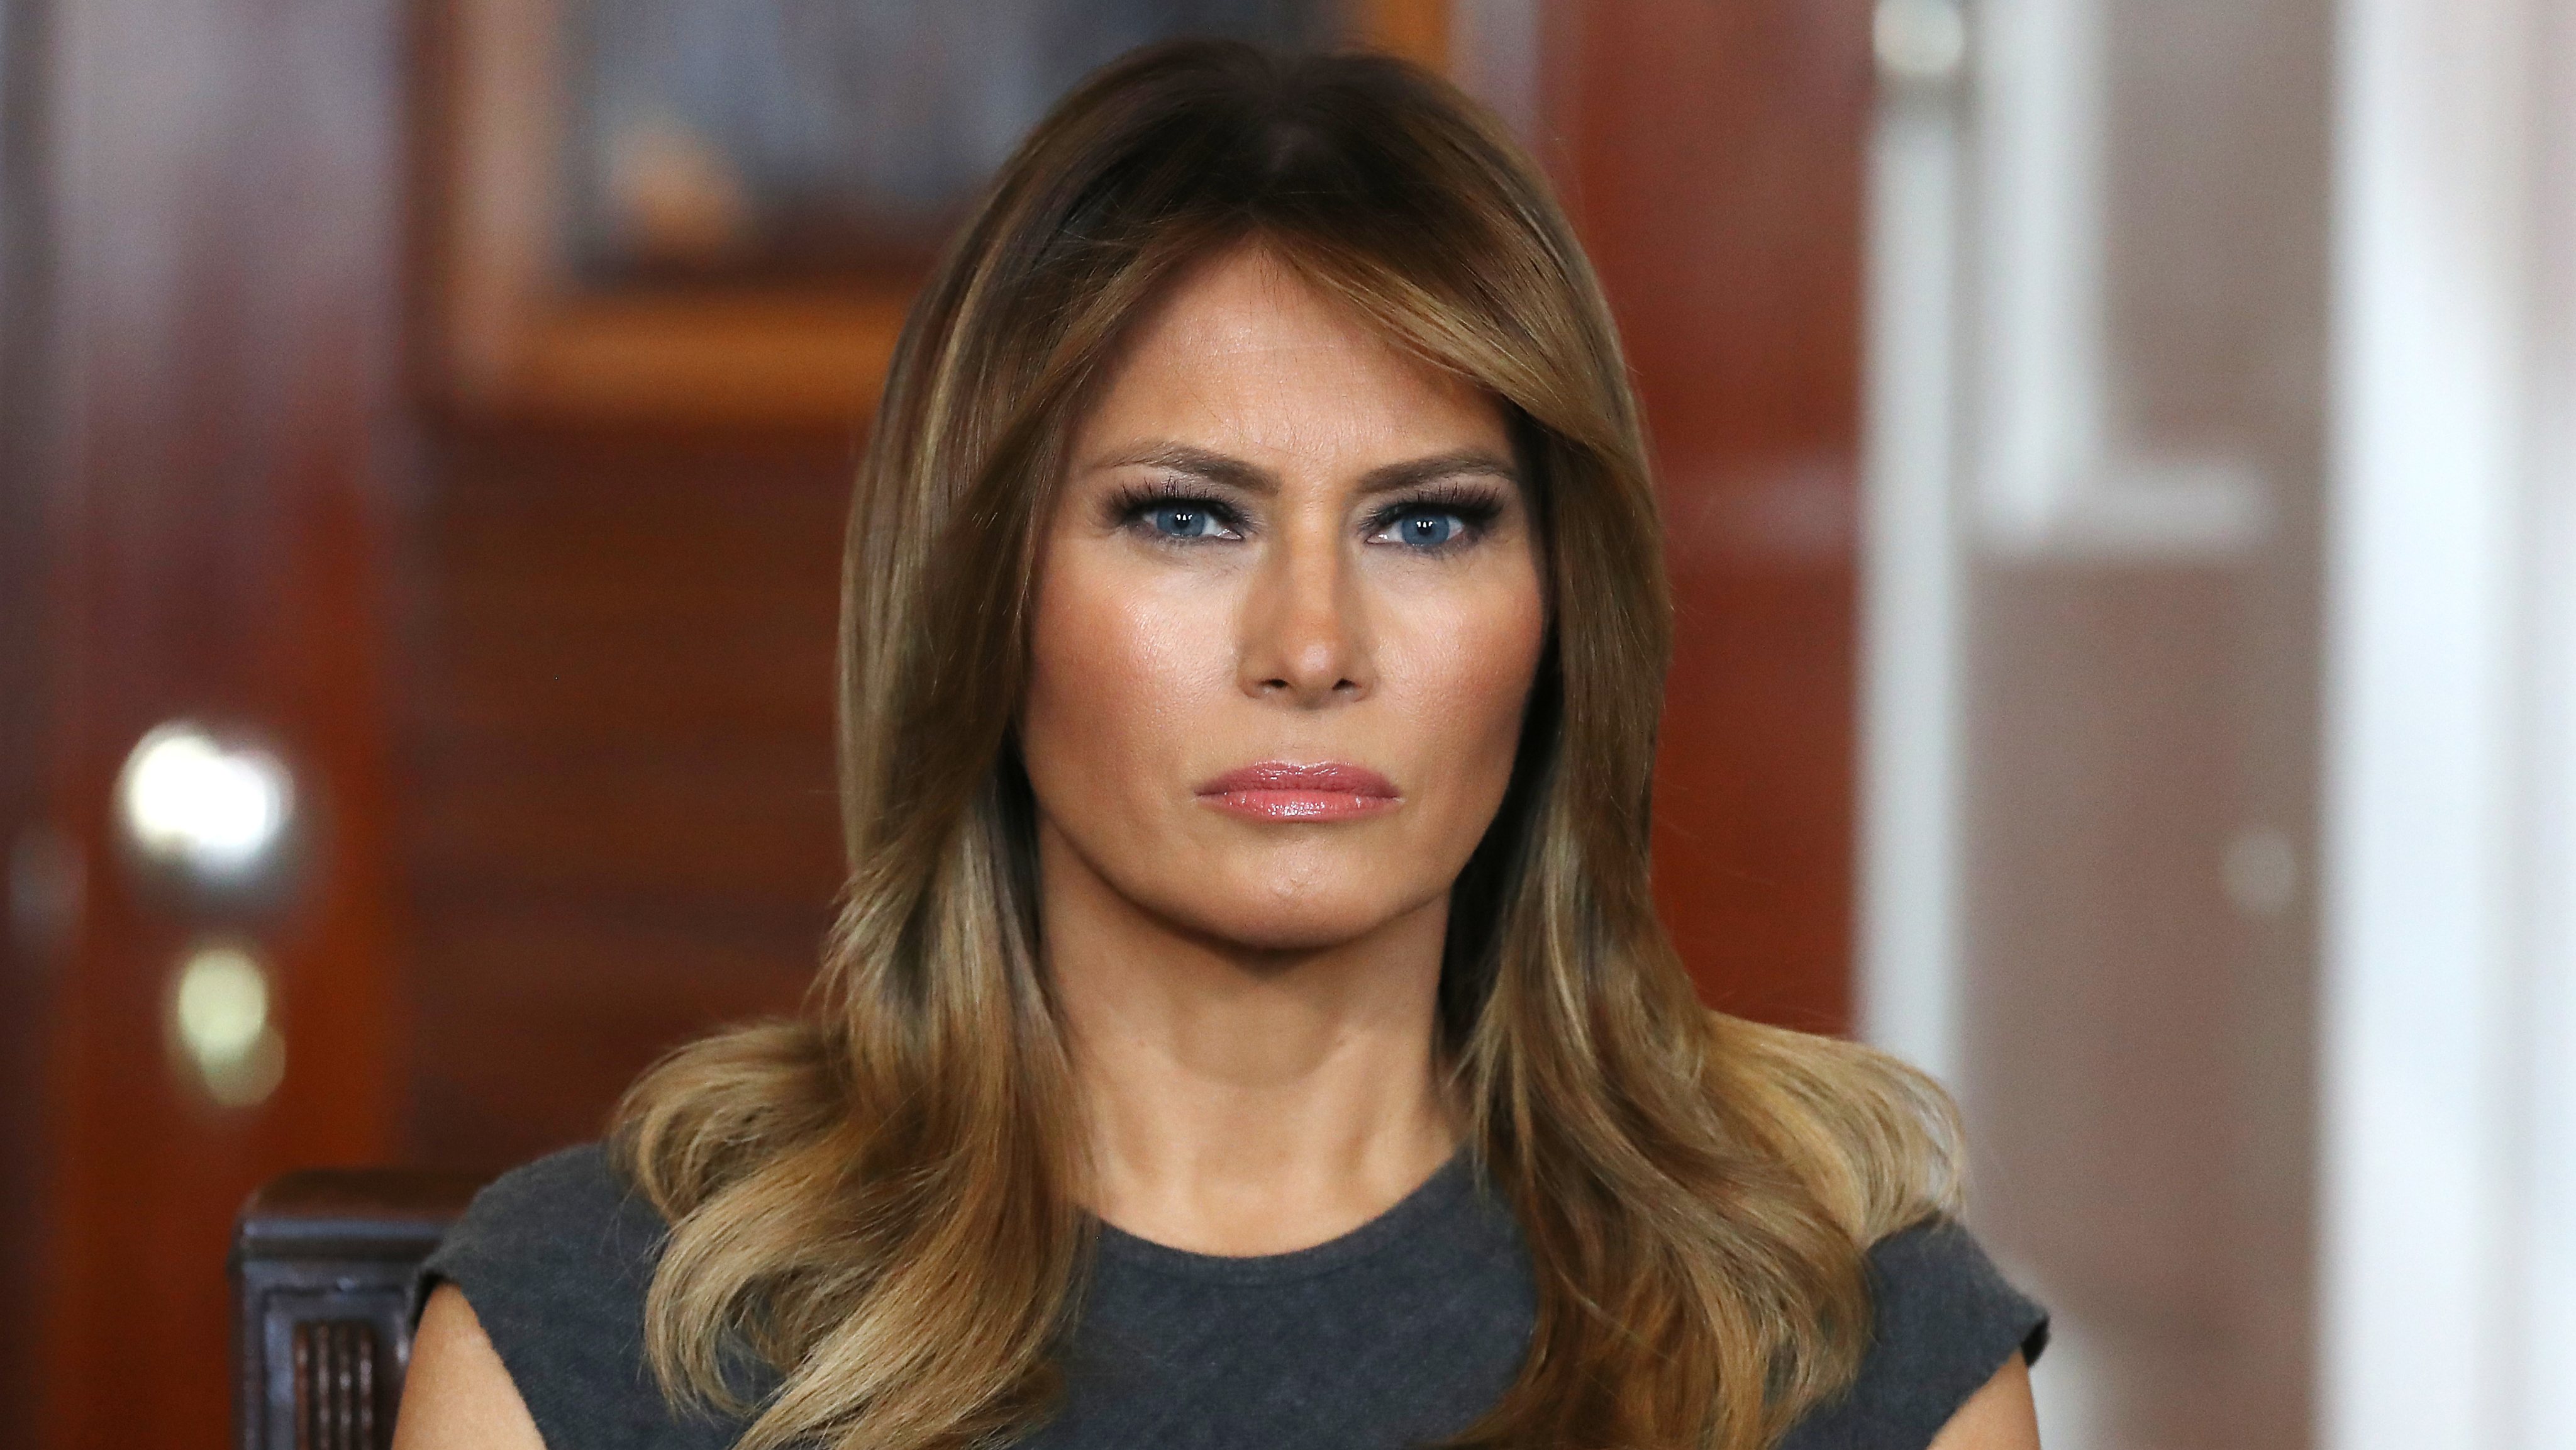 First Lady Melania Trump Meets With Teens To Discuss Youth Vaping